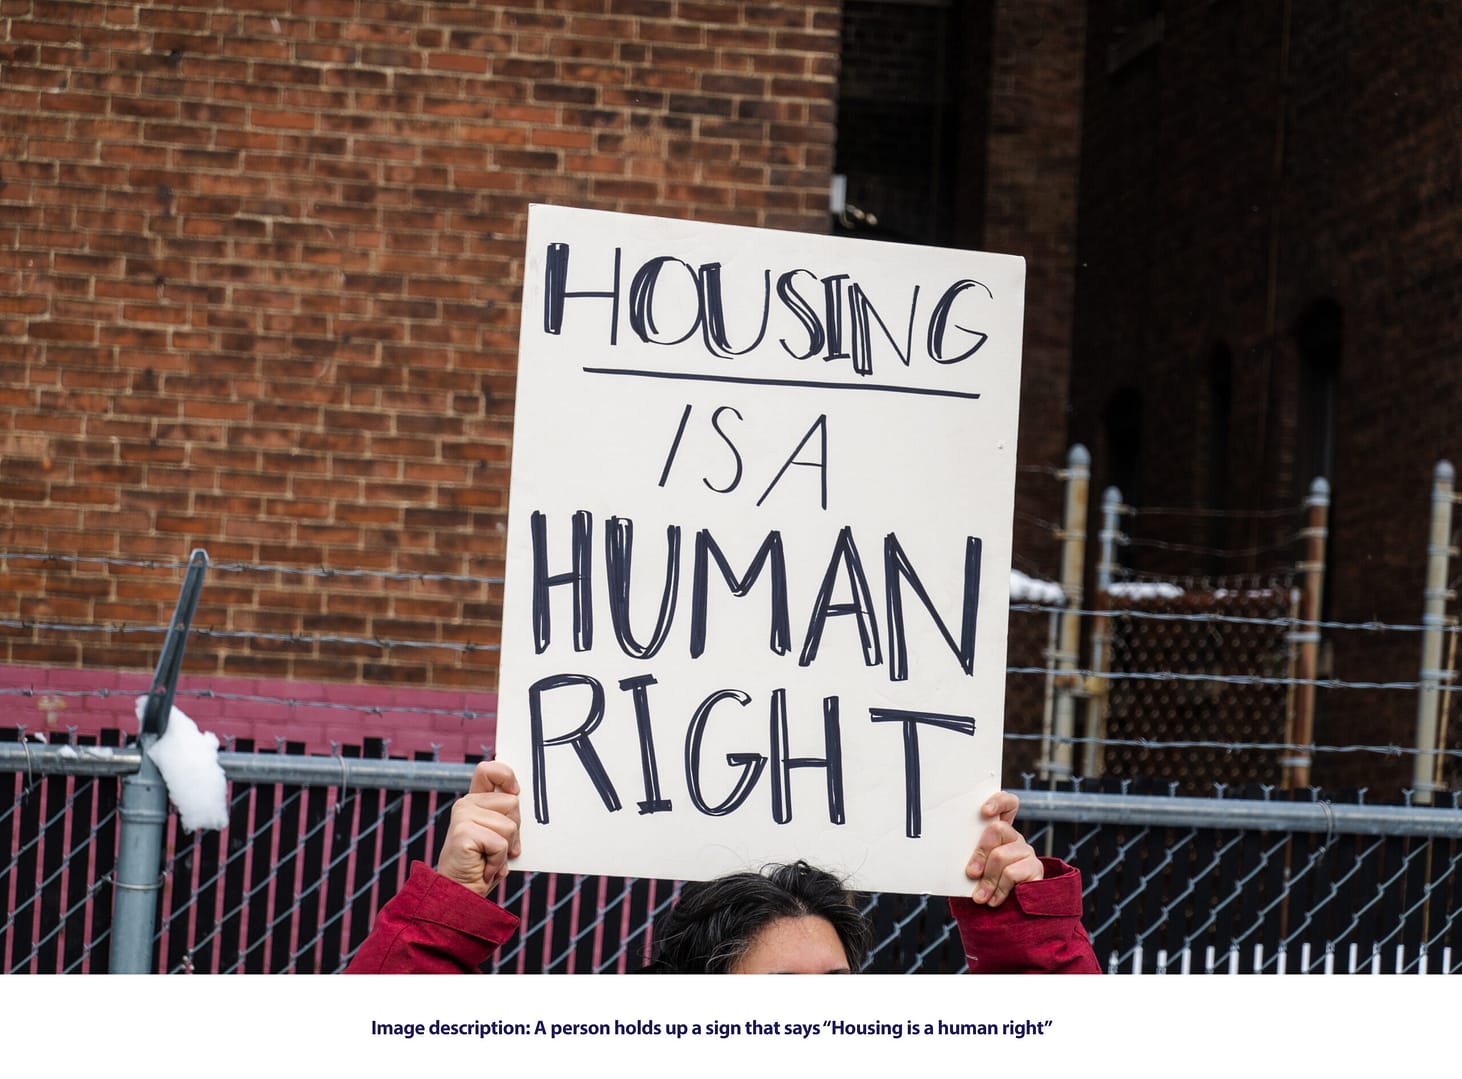 A person holds up a sign that says "Housing is a human right."